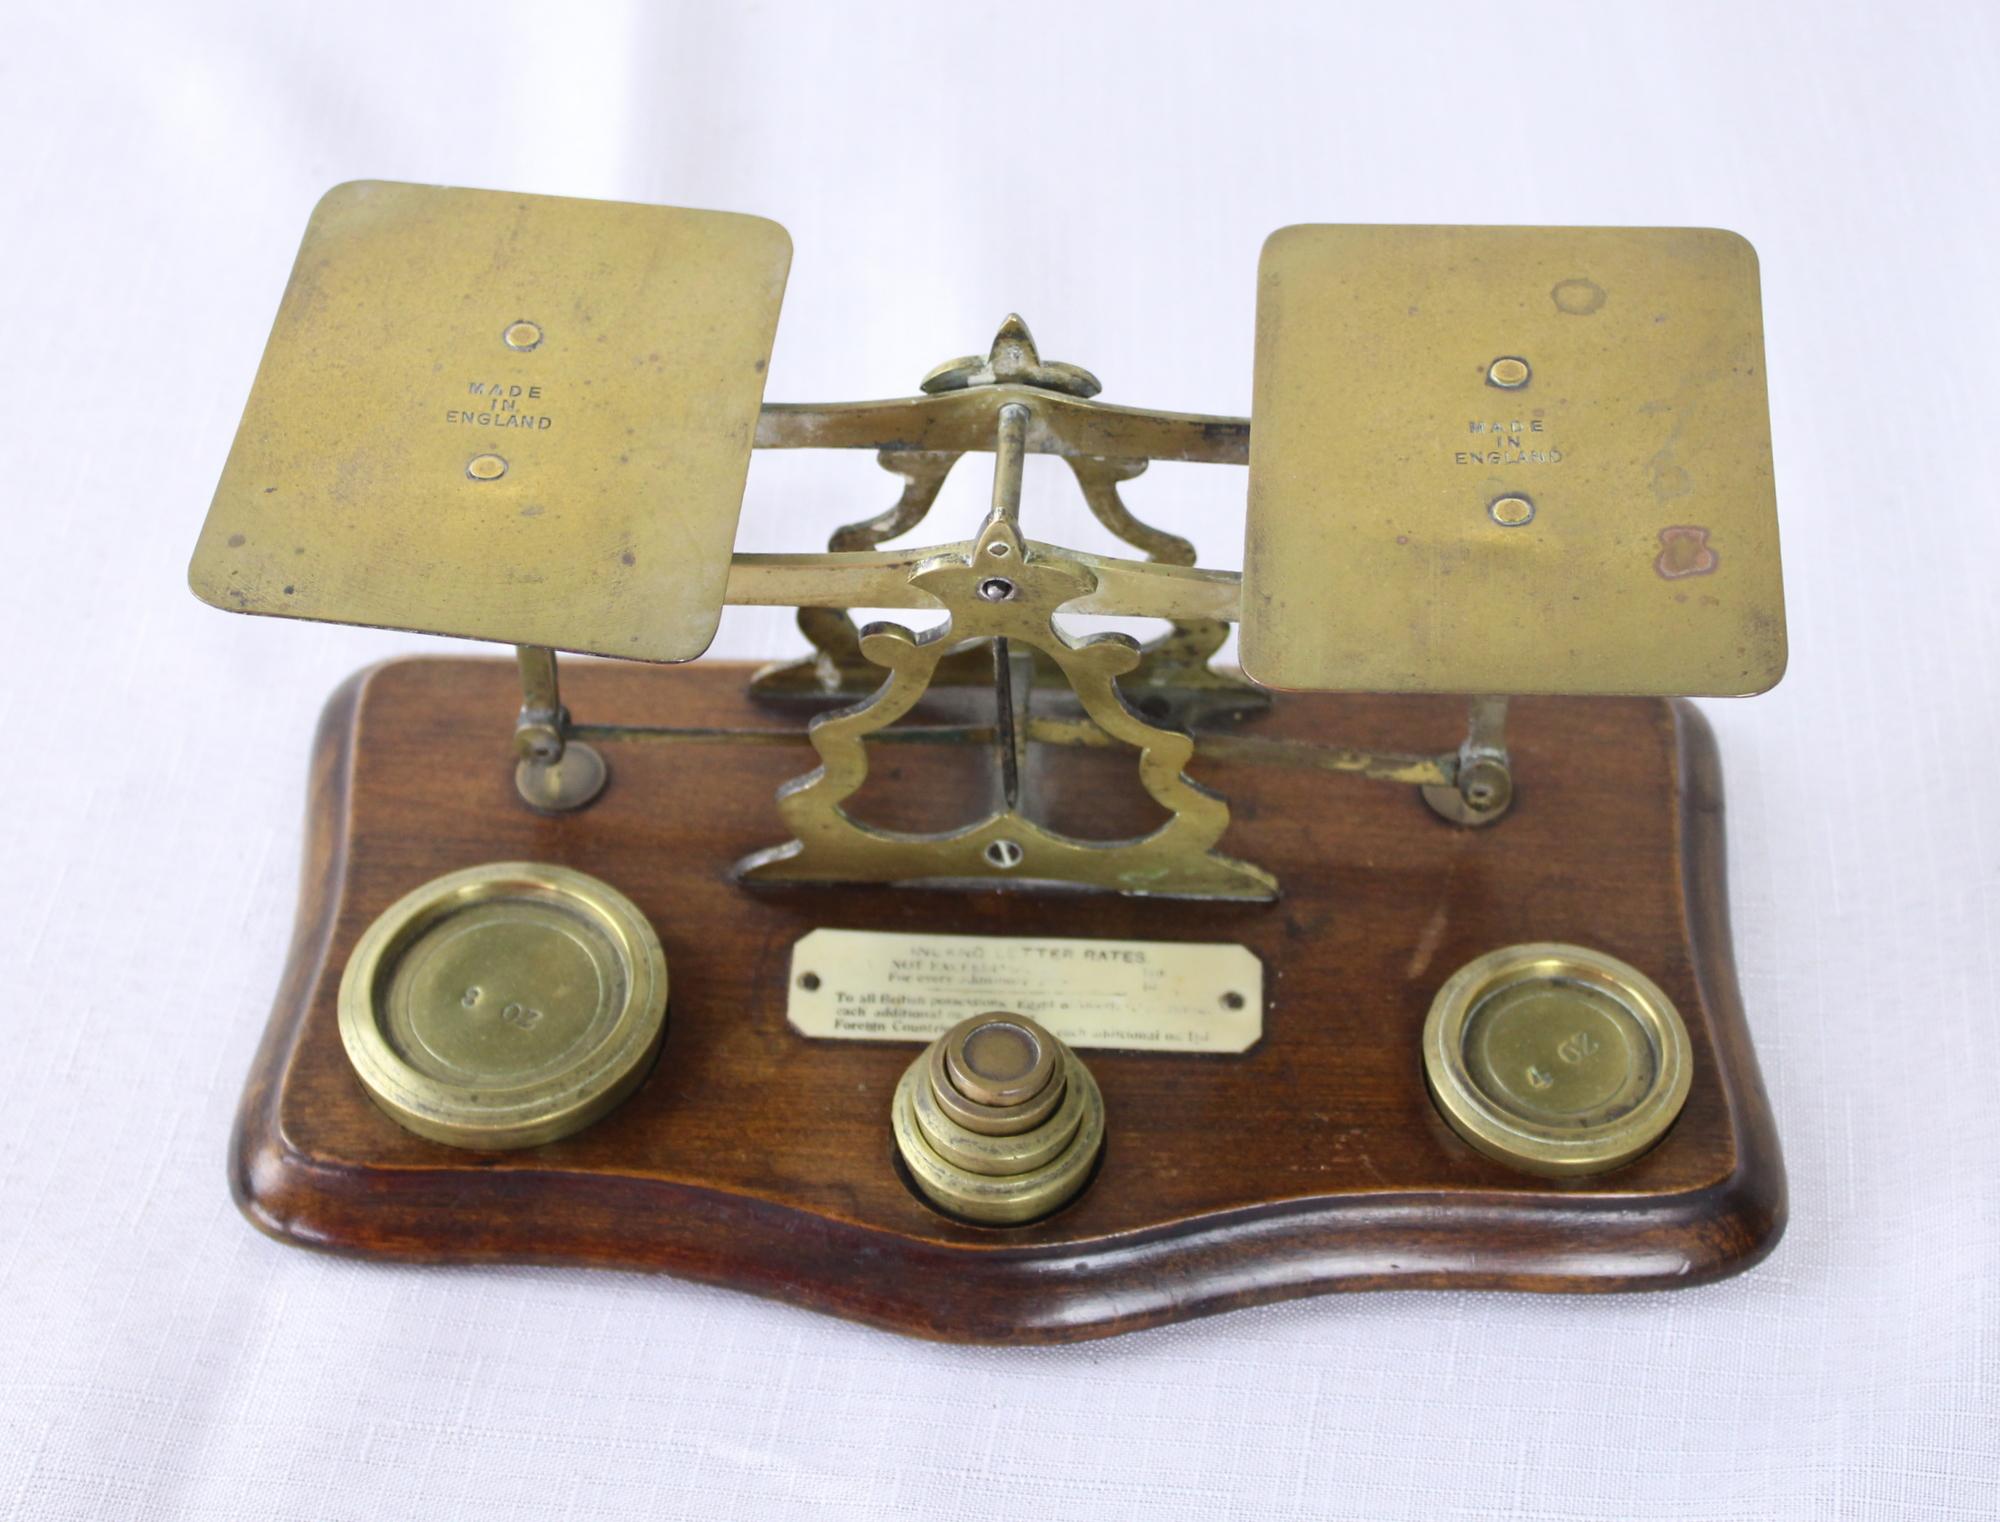 A small English postal scale, identified as circa 1915 given the prices per oz. and the foreign country assignations on the plaque. It stands on an oak base with serpentine edge. There are 6 weights which measure 8 oz, 4 oz, 2 oz 1 oz, ½ oz, ¼ oz.